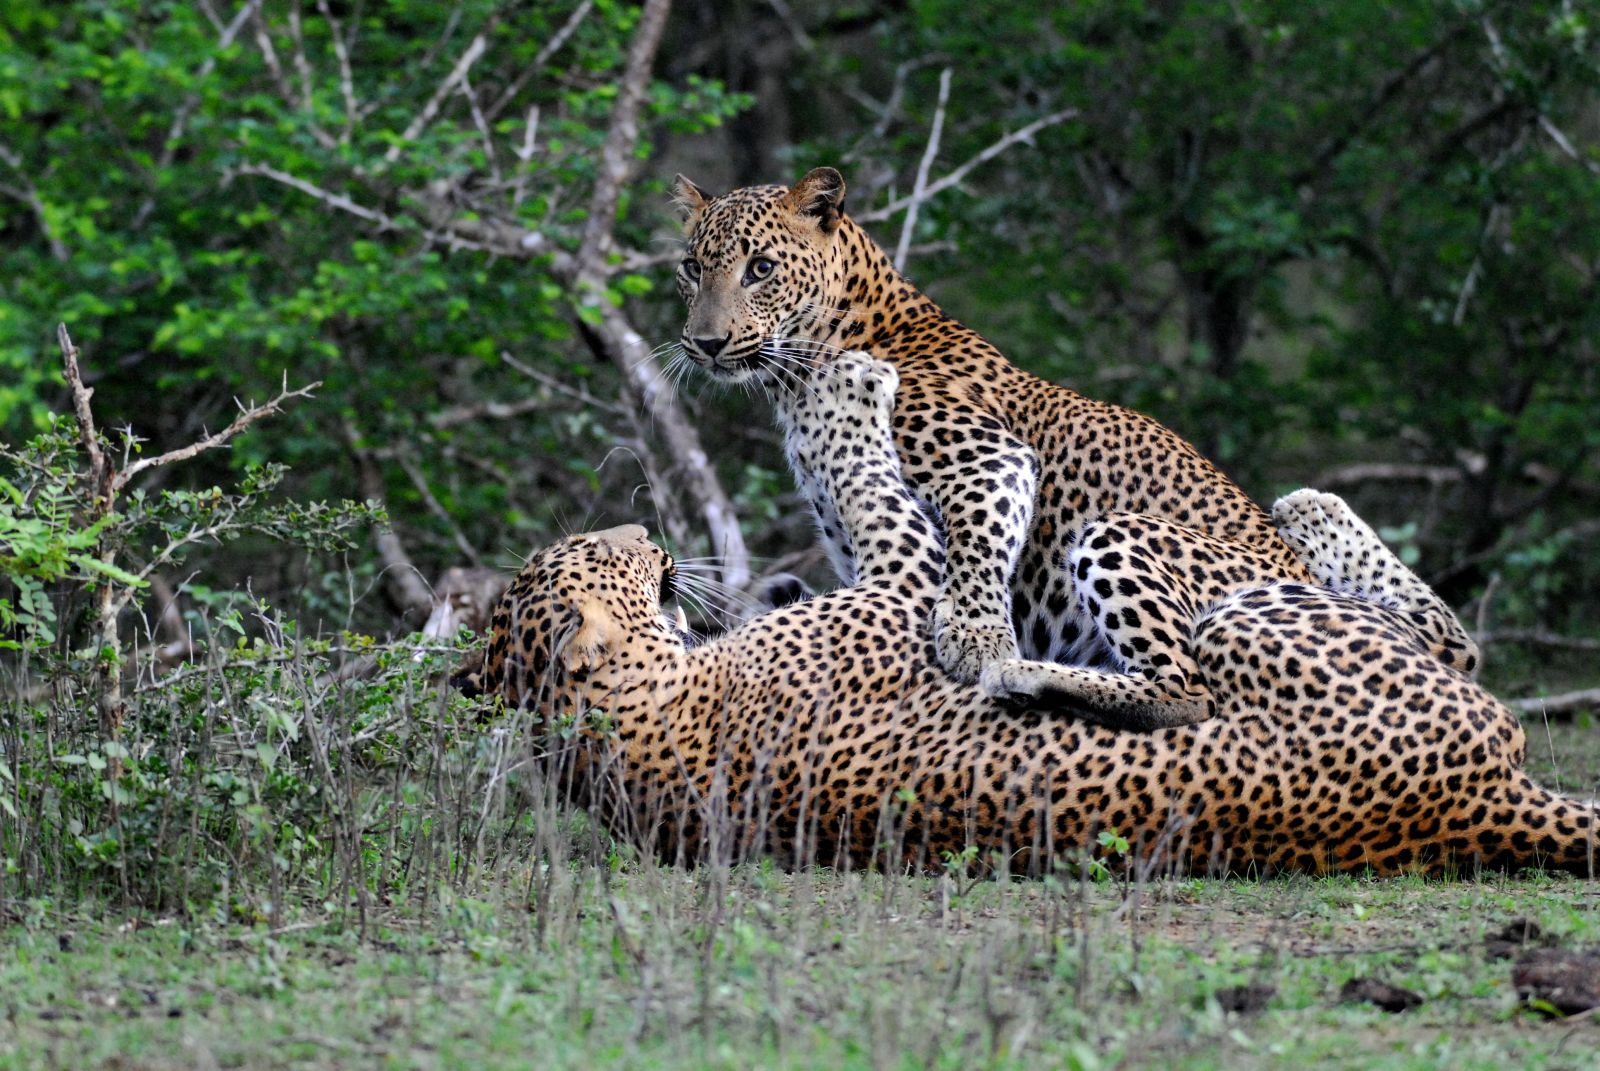 Leopards in Yala Sri Lanka photographed on excursion from Wild Coast Tented Lodge